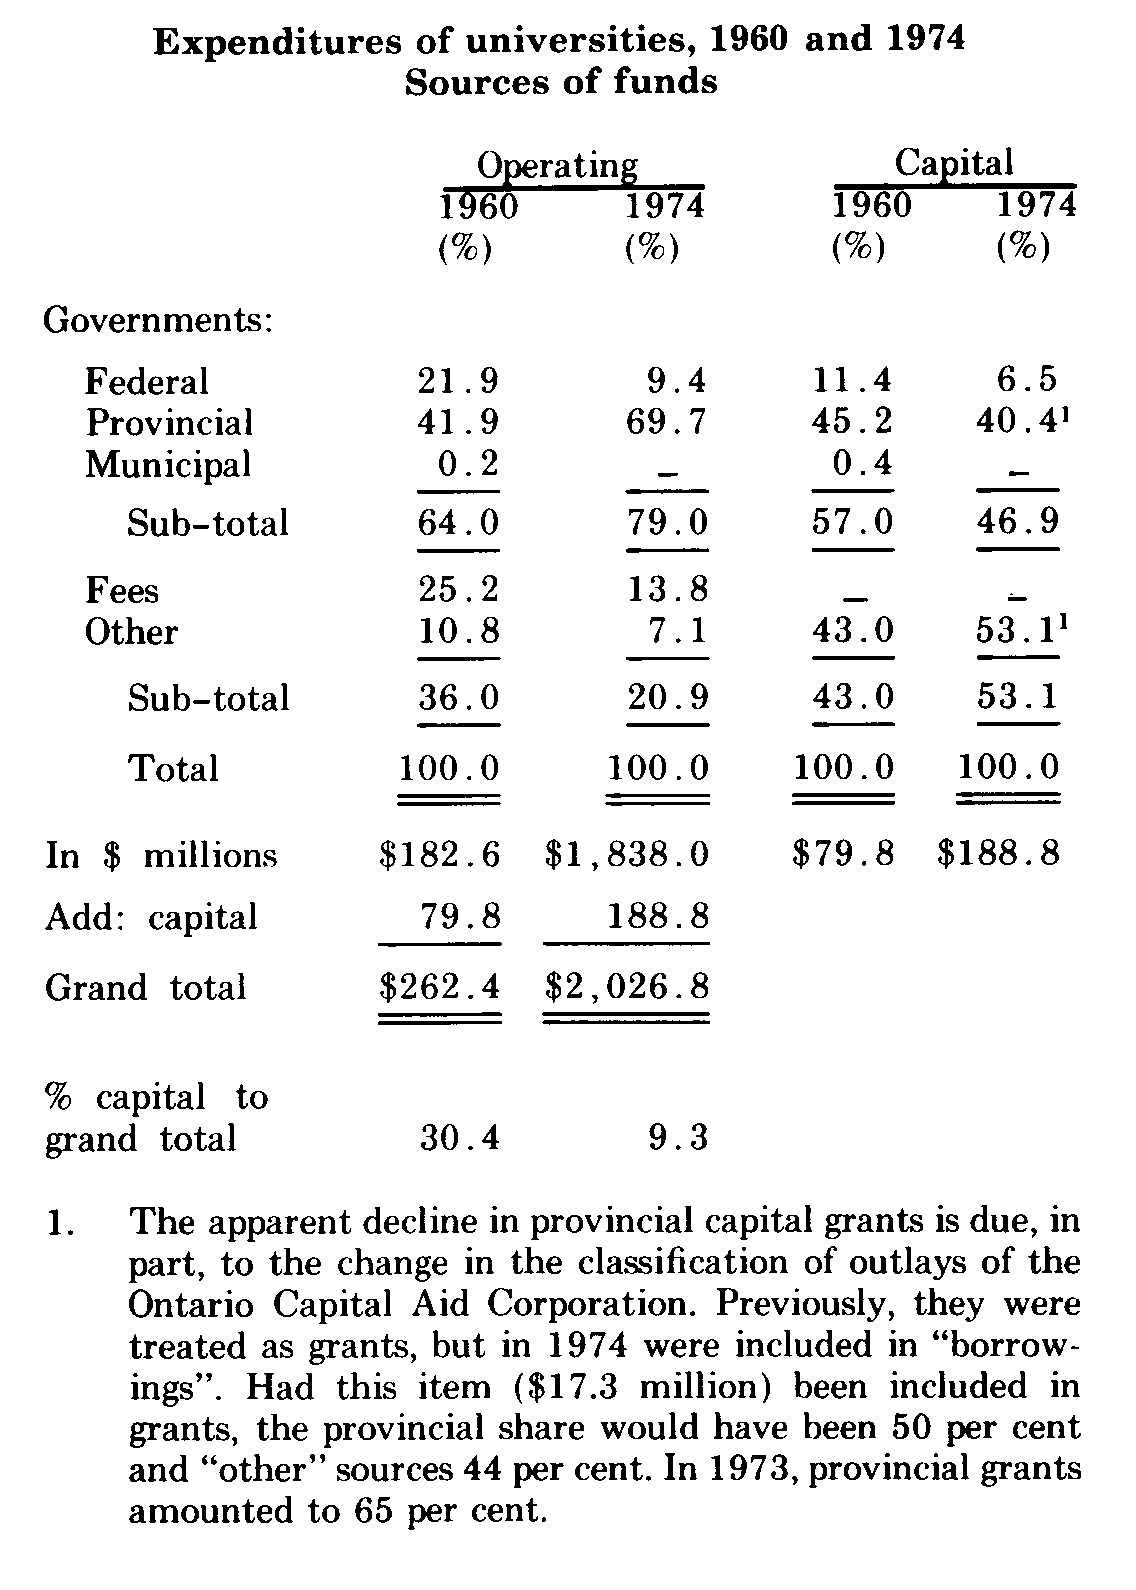 Expenditures of universities, 1960 and 1974. Source of funds